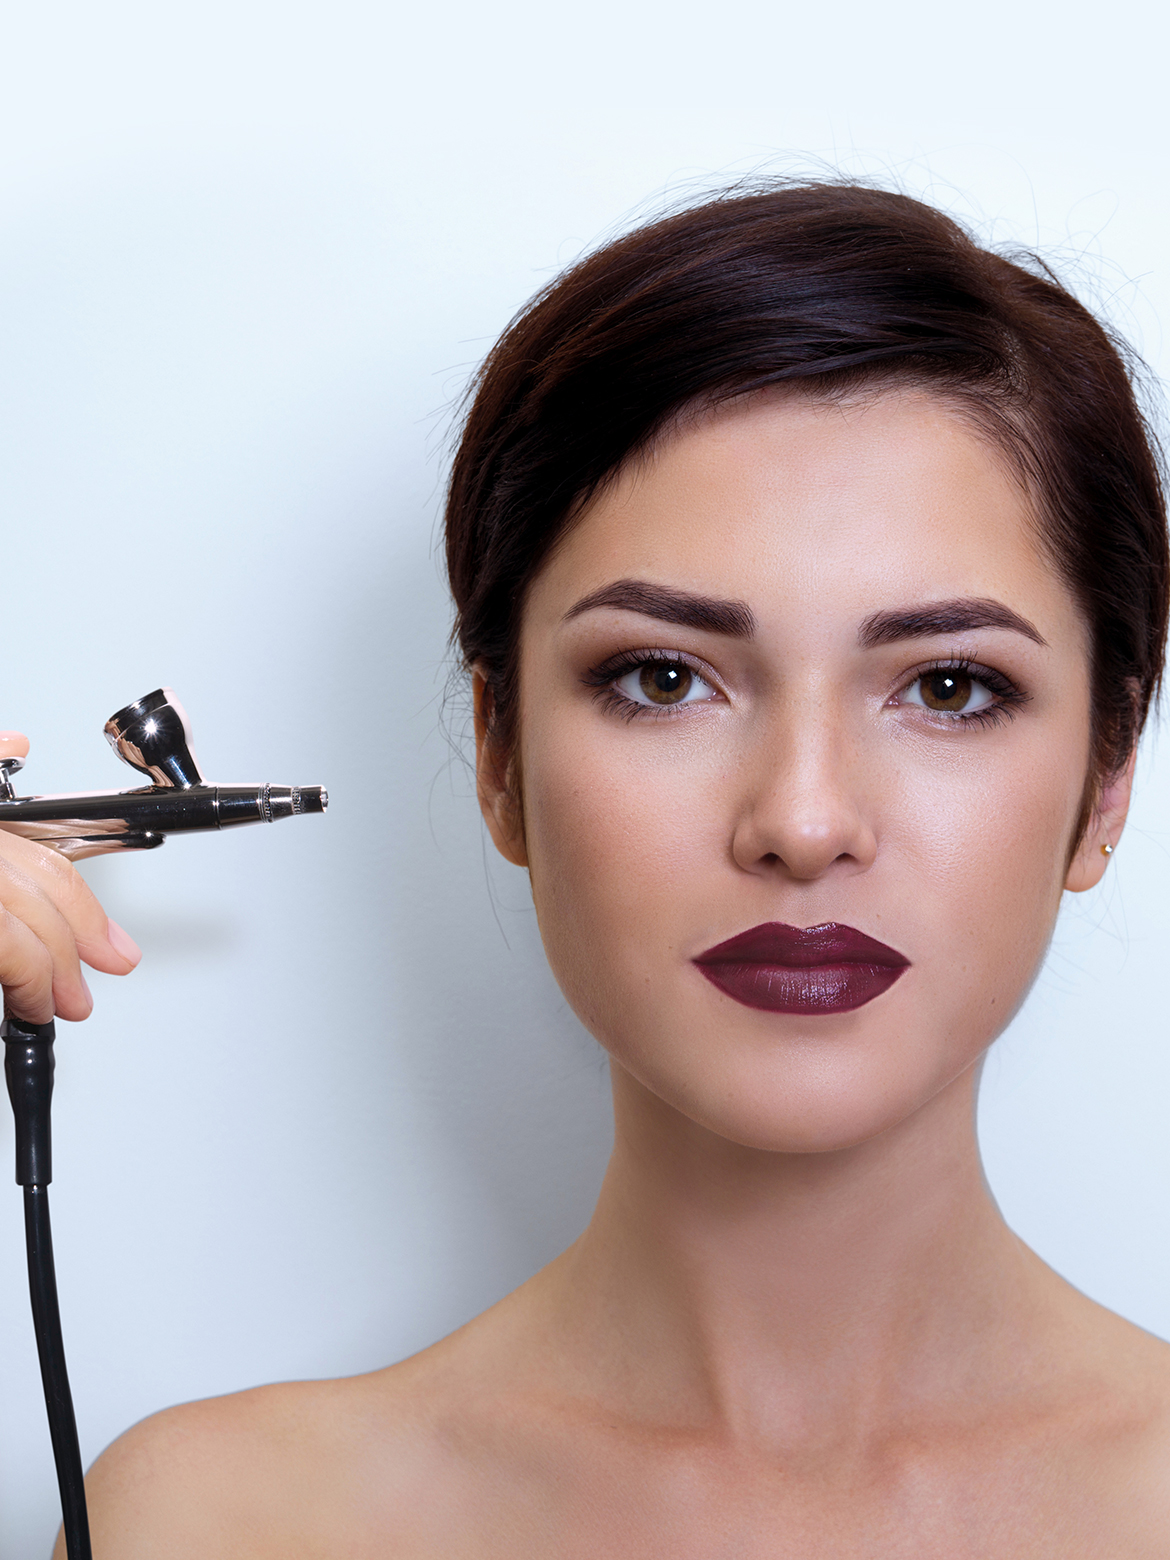 The How, What, Why and When of Airbrush Makeup